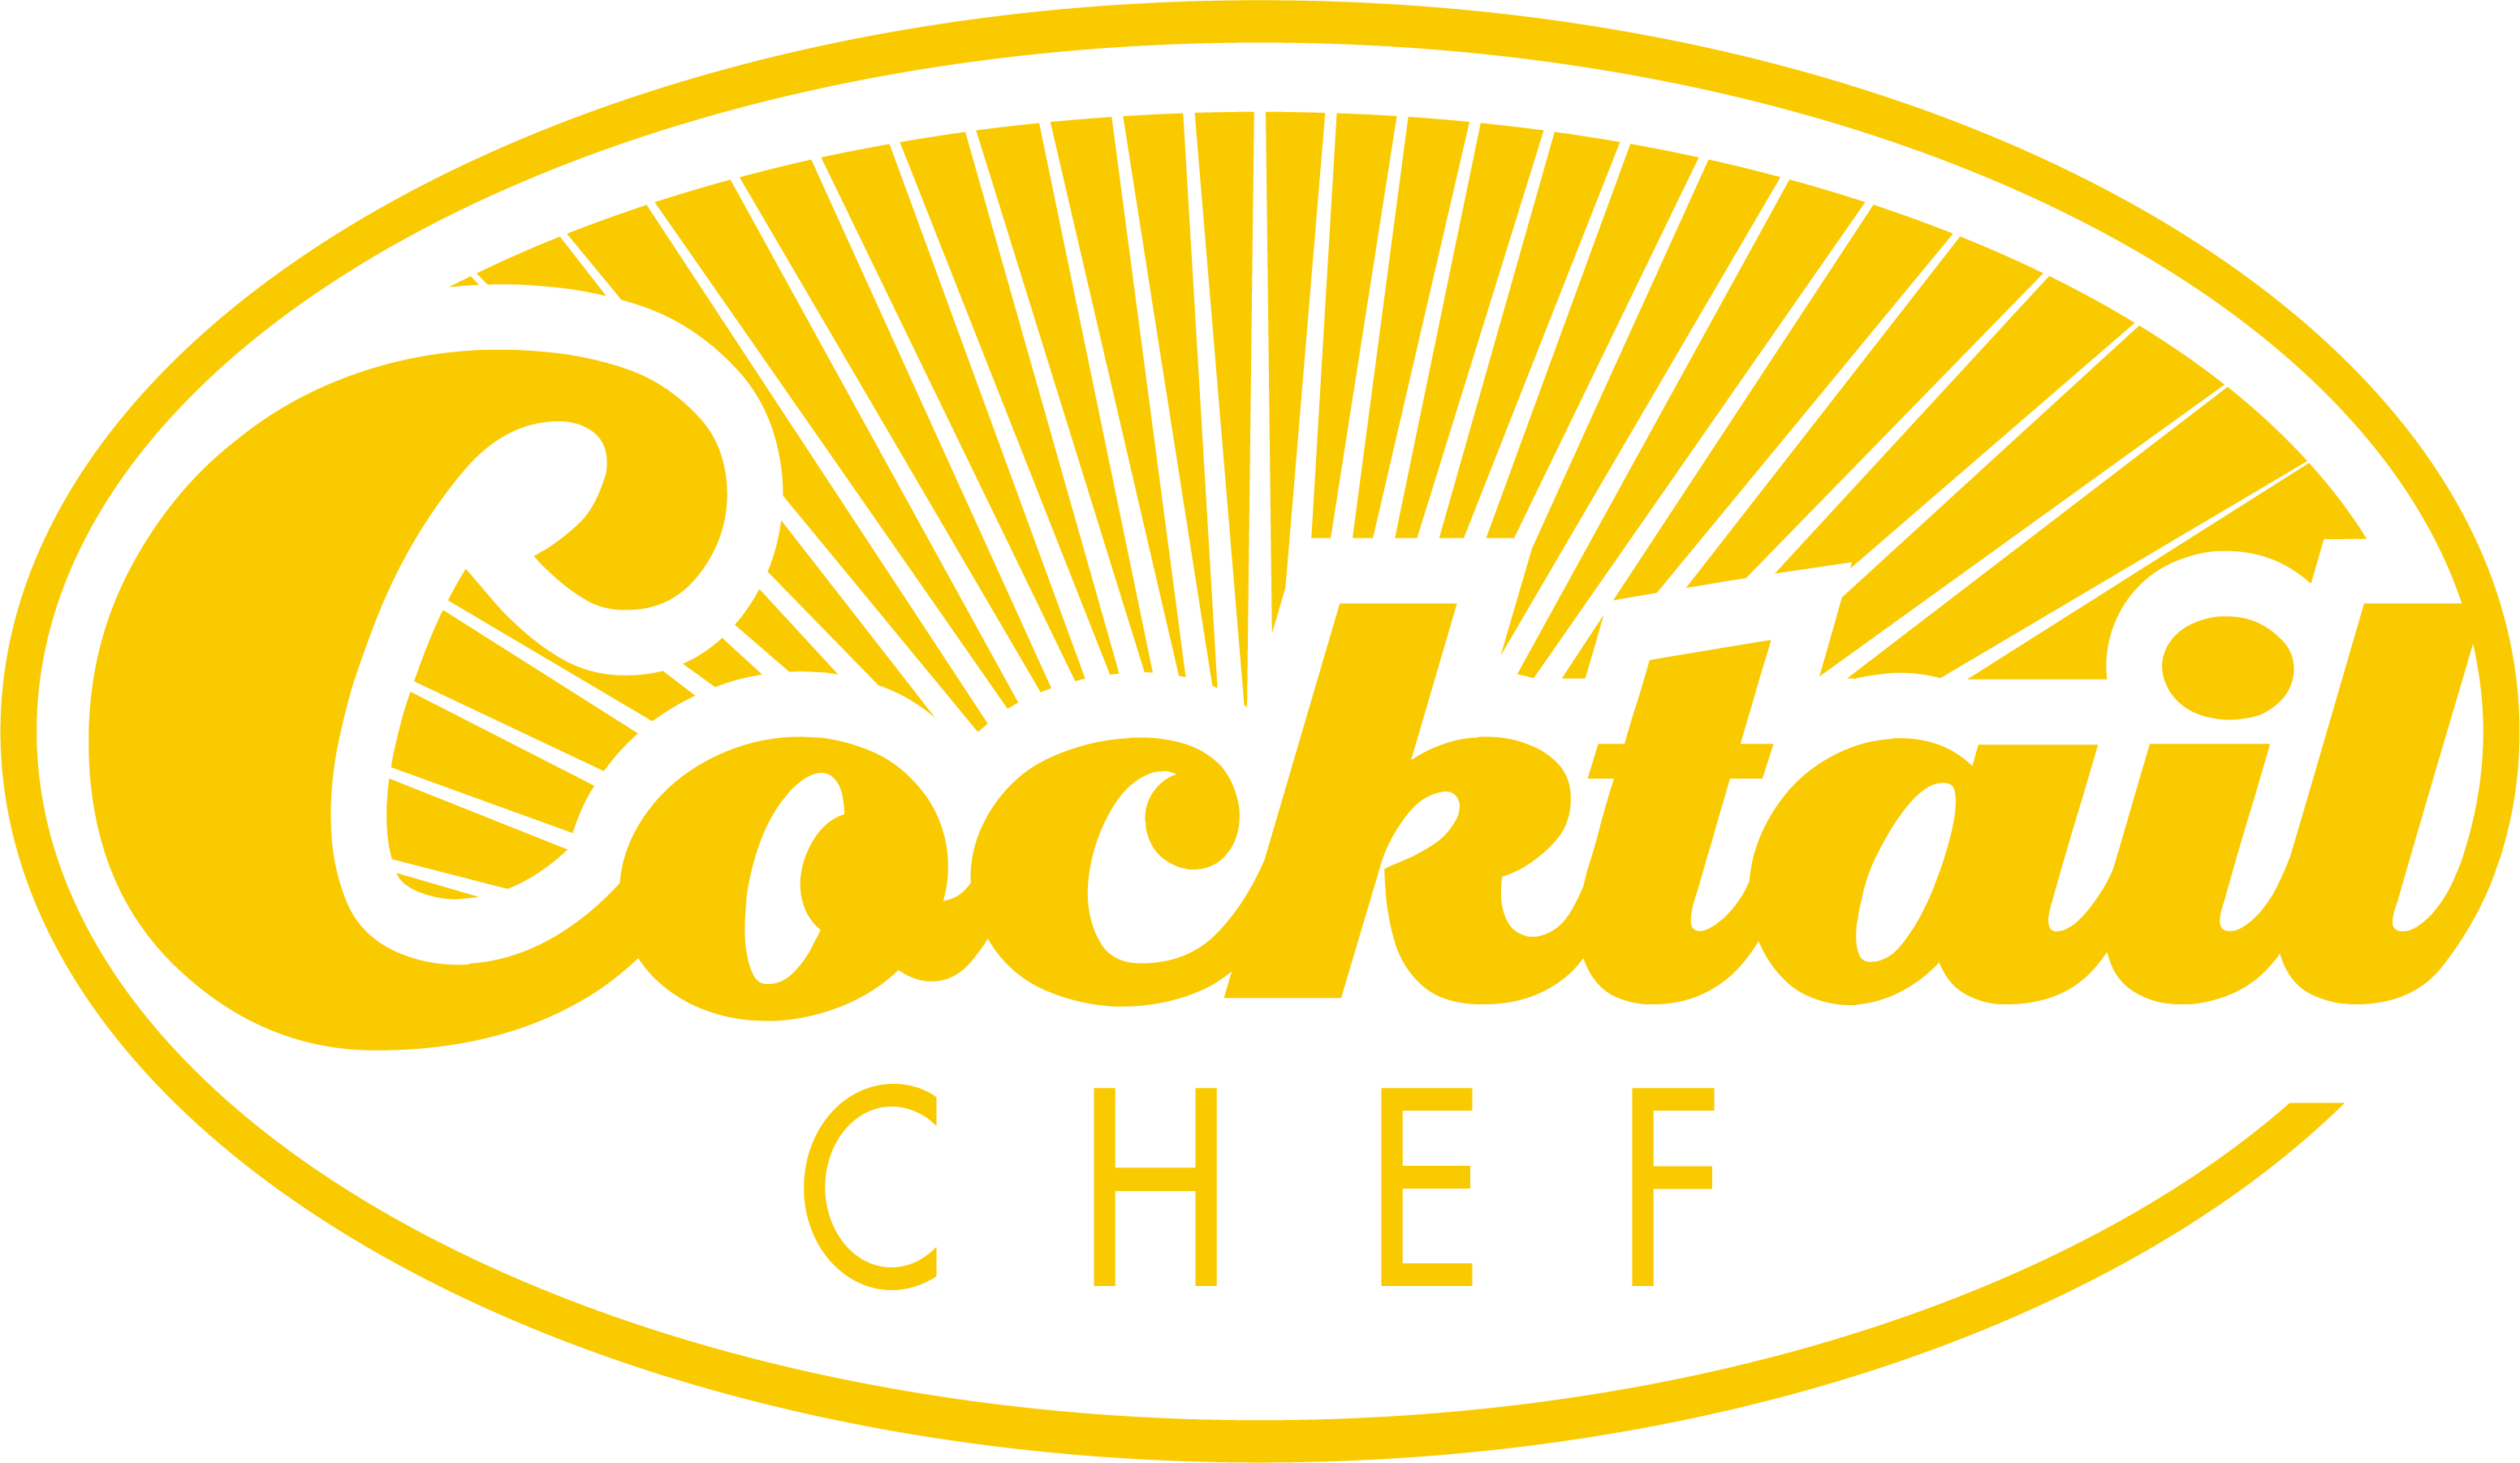 Cocktail Chef 